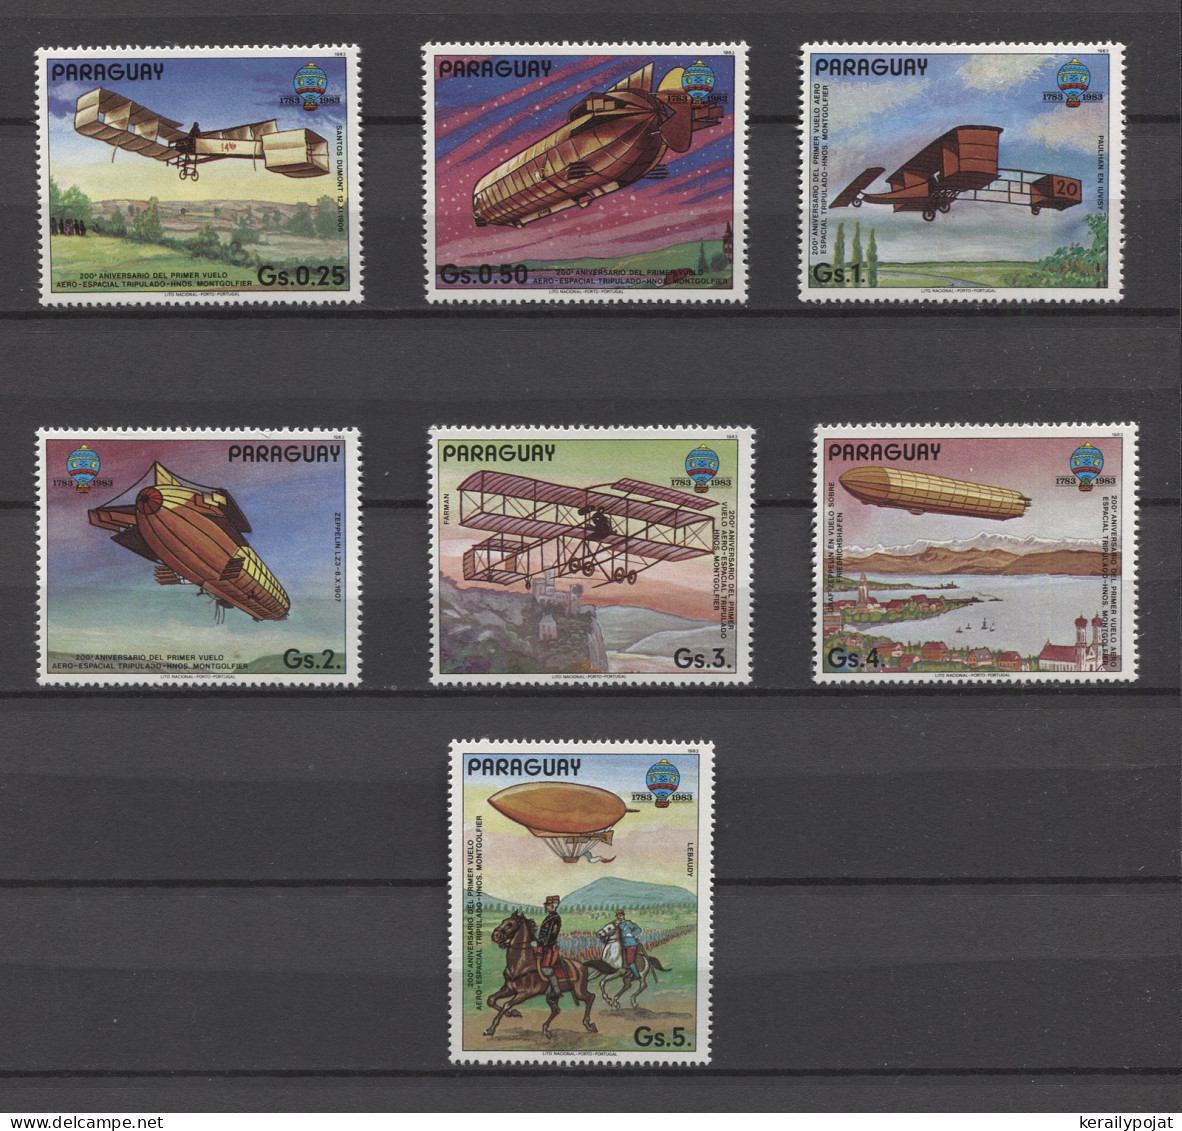 Paraguay - 1984 Aviation MNH__(TH-23676) - Paraguay